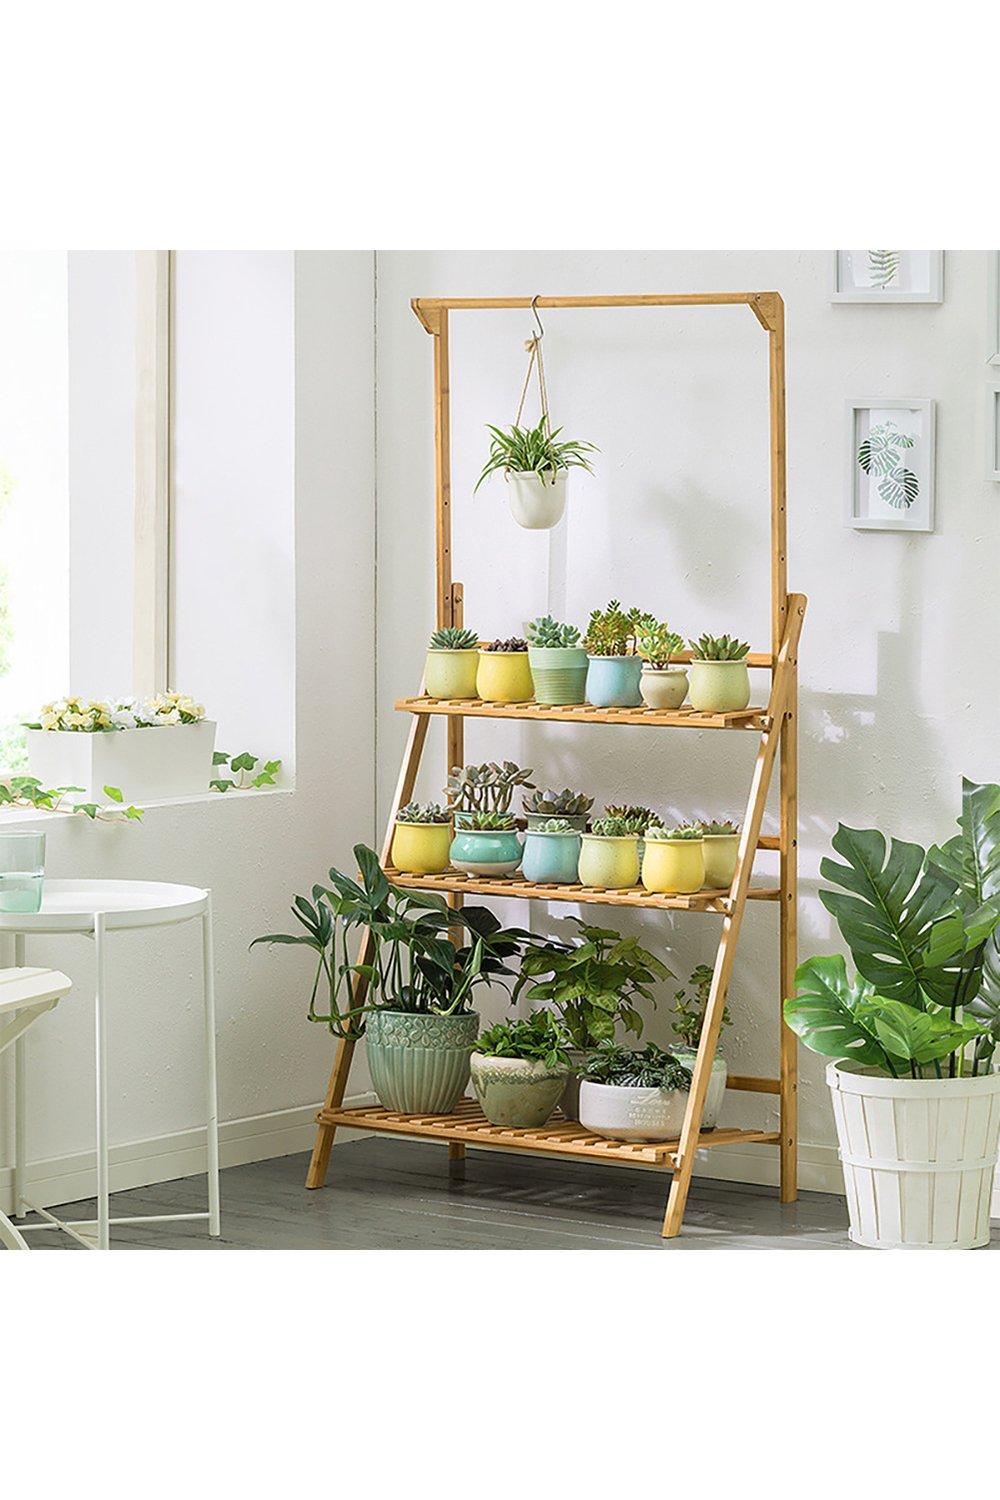 78% off the Living and Home 3 Tier Plant Stand